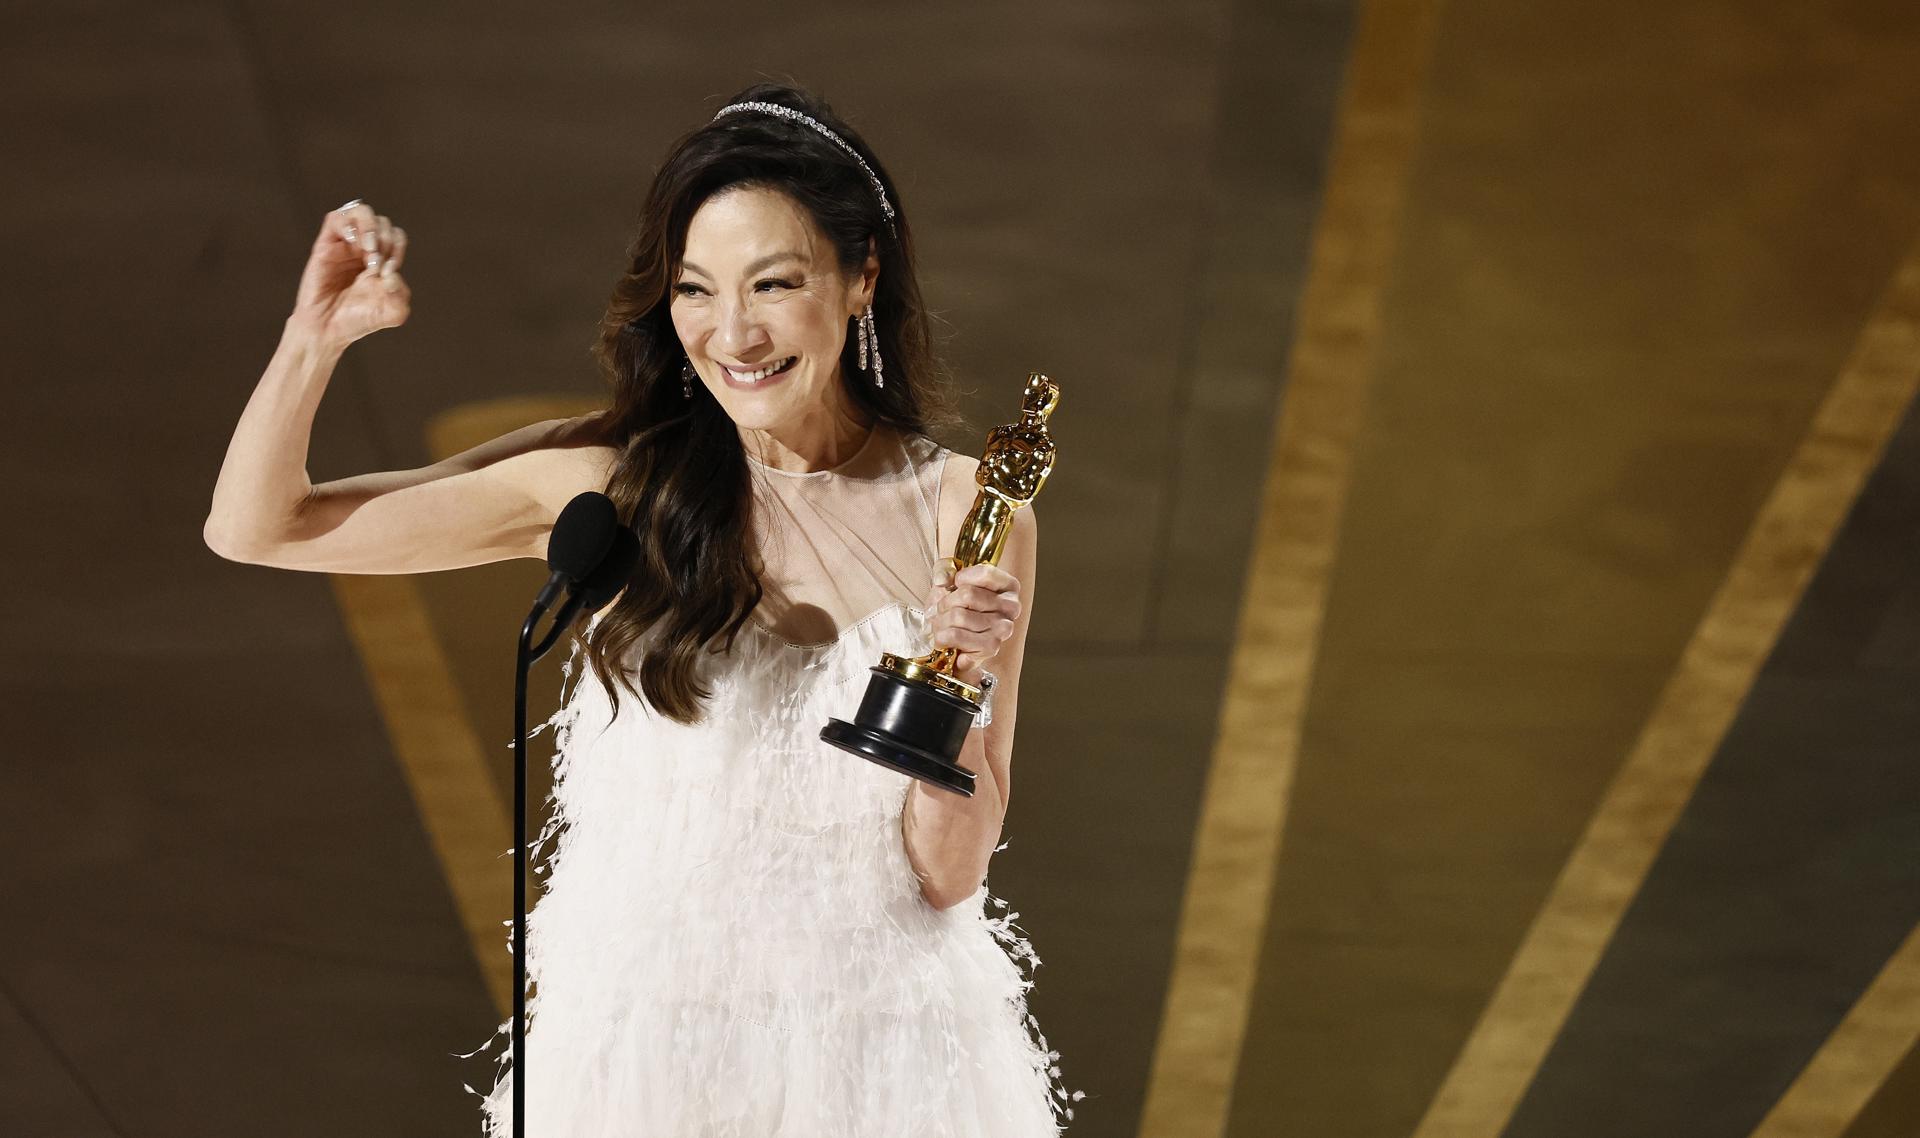 Michelle Yeoh after winning the Oscar for Best Actress for 'Everything Everywhere All at Once' during the 95th annual Academy Awards ceremony at the Dolby Theatre in Hollywood, Los Angeles, California, USA, 12 March 2023. EFE/EPA/ETIENNE LAURENT